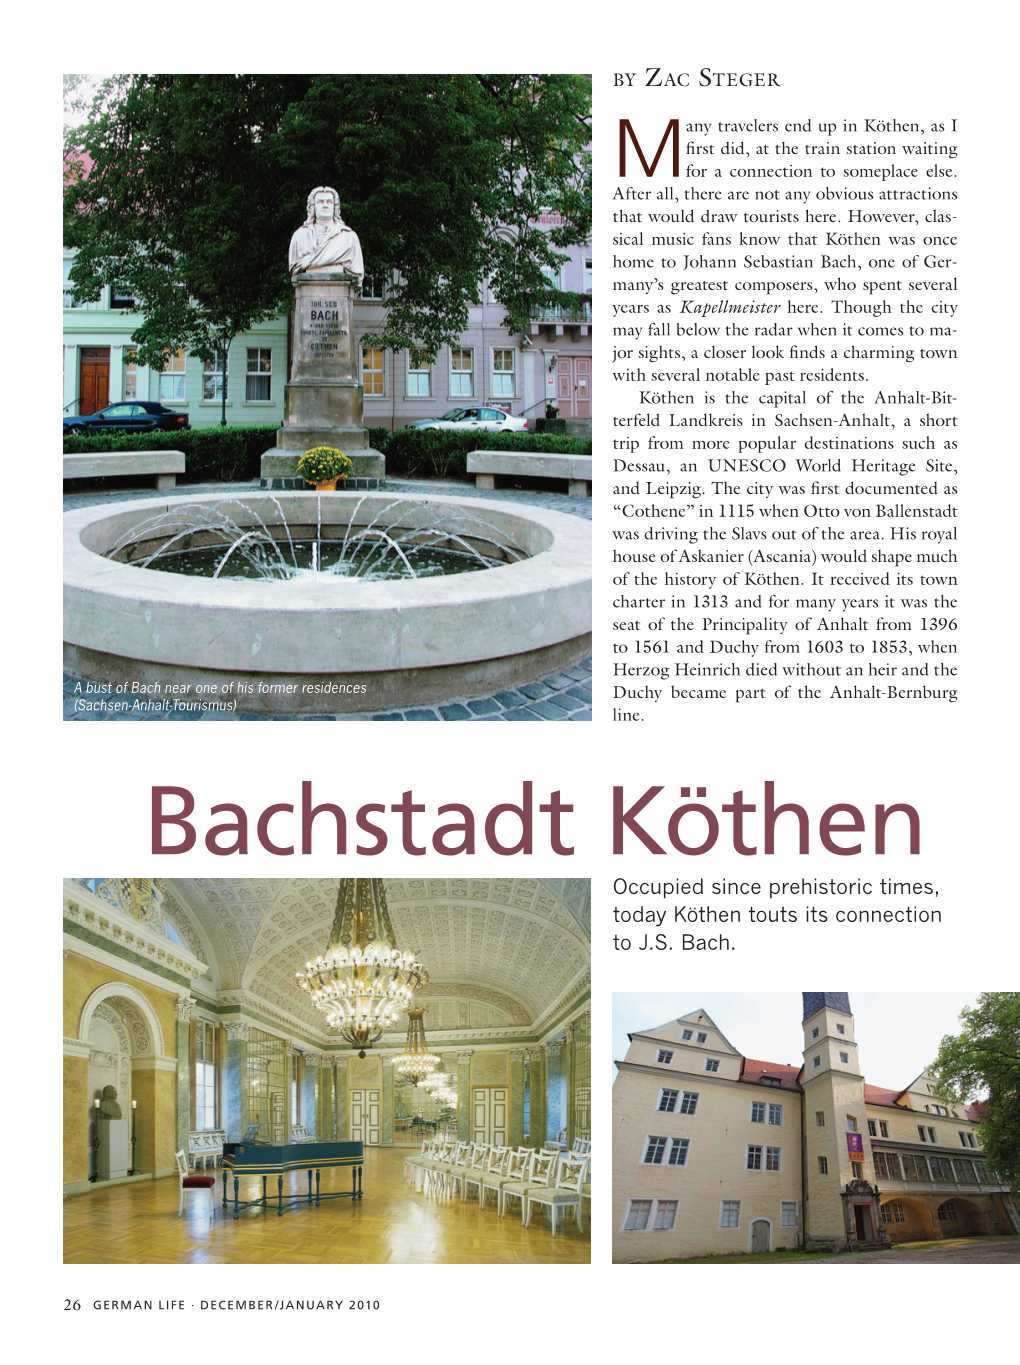 Bachstadt Köthen Occupied Since Prehistoric Times, Today Köthen Touts Its Connection to J.S